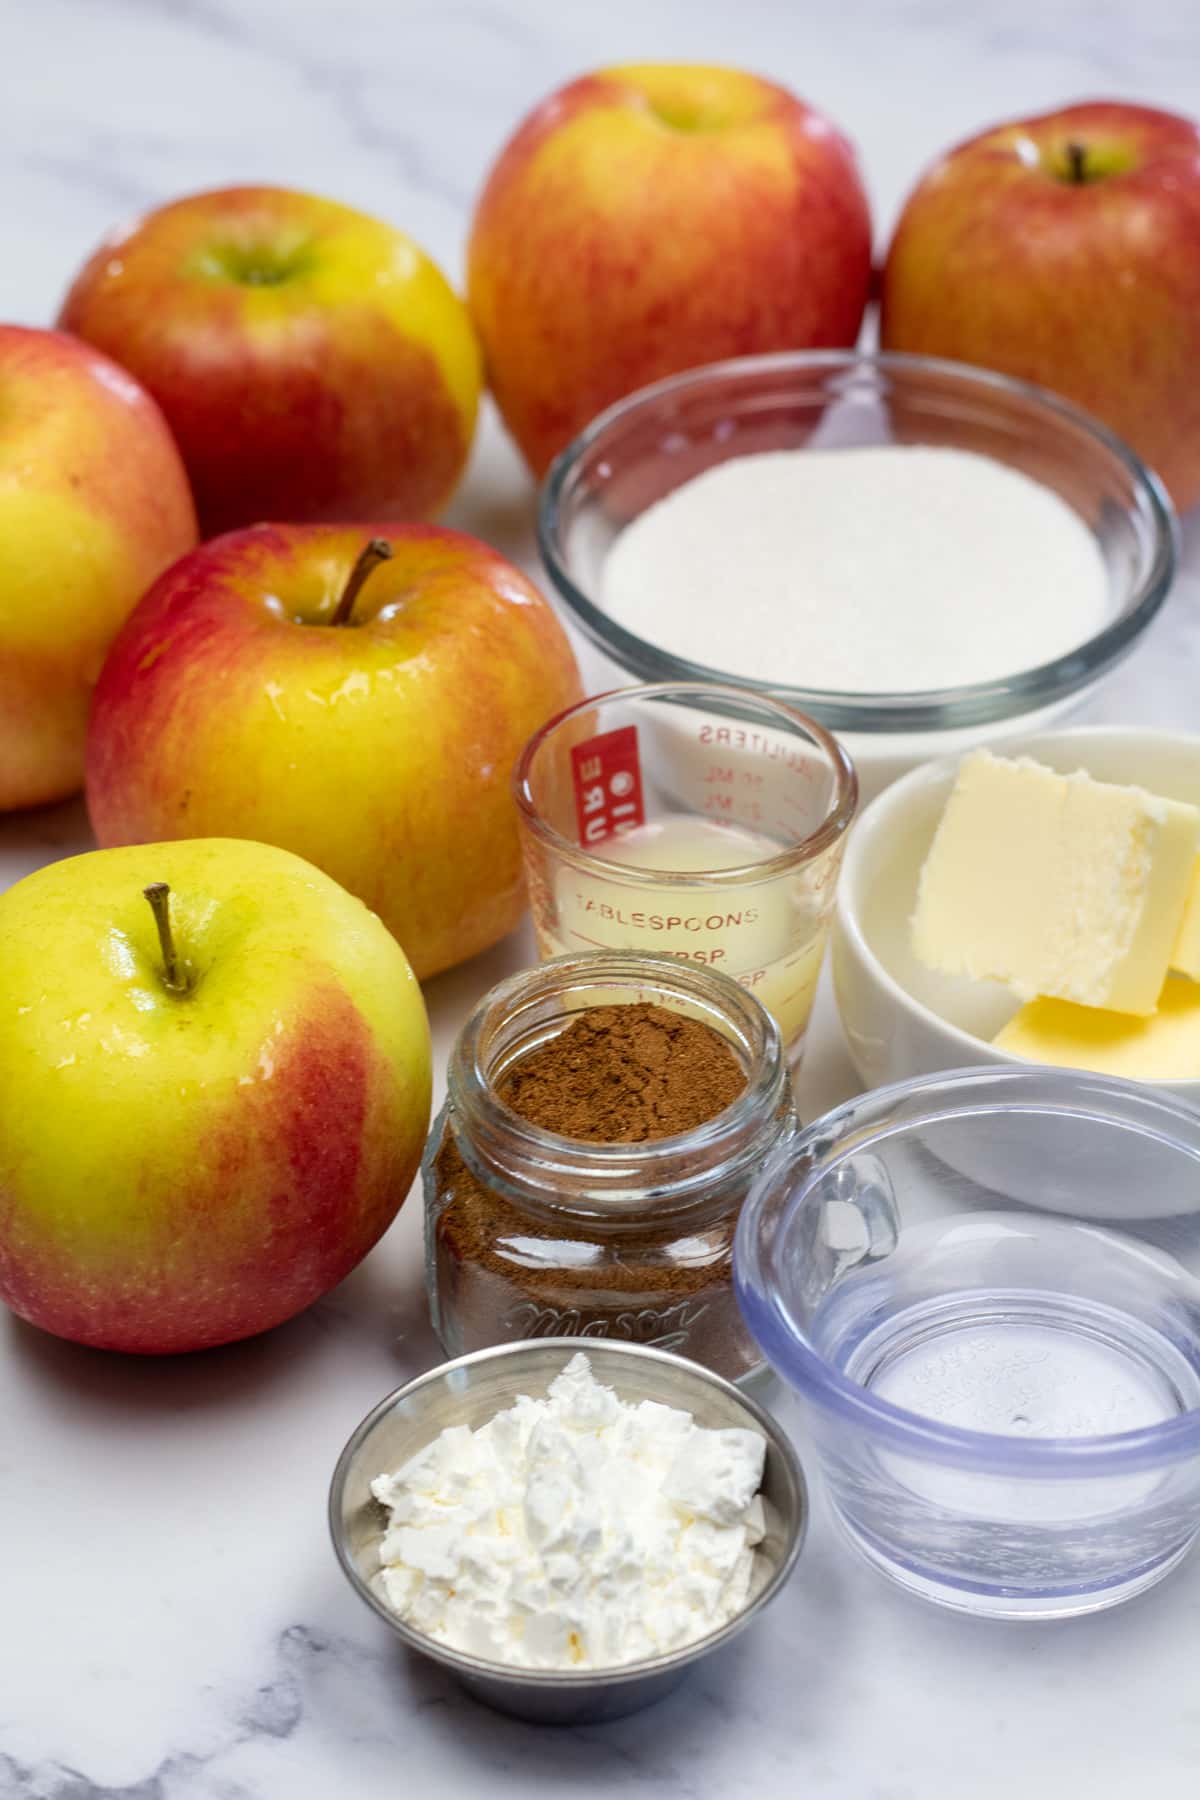 Tall photo showing ingredients needed for making apple pie filling.